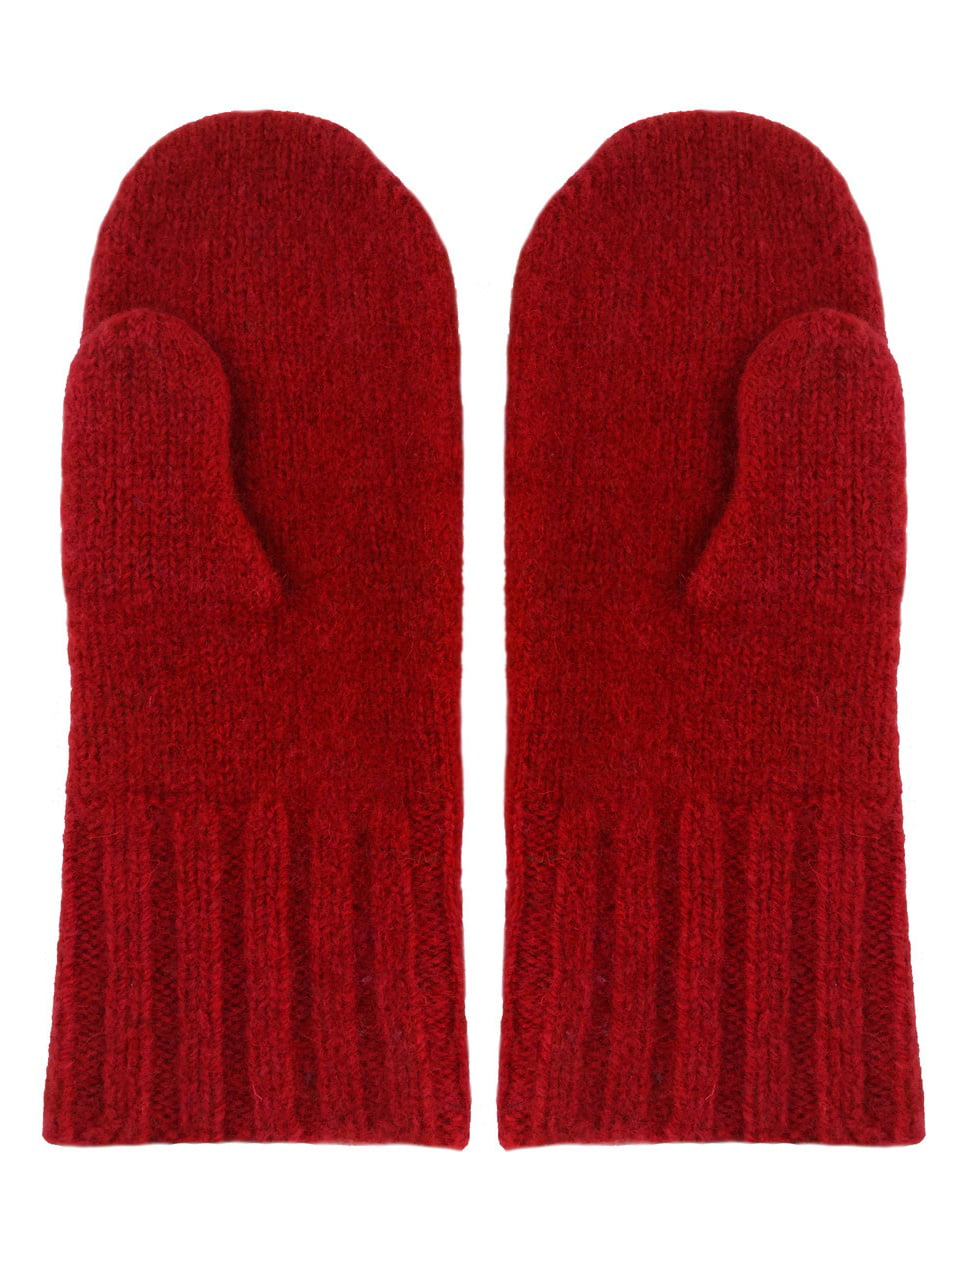 Dachstein Woolwear 100% Extra Warm Austrian Boiled Wool Alpine Mittens in Many Vibrant Colors